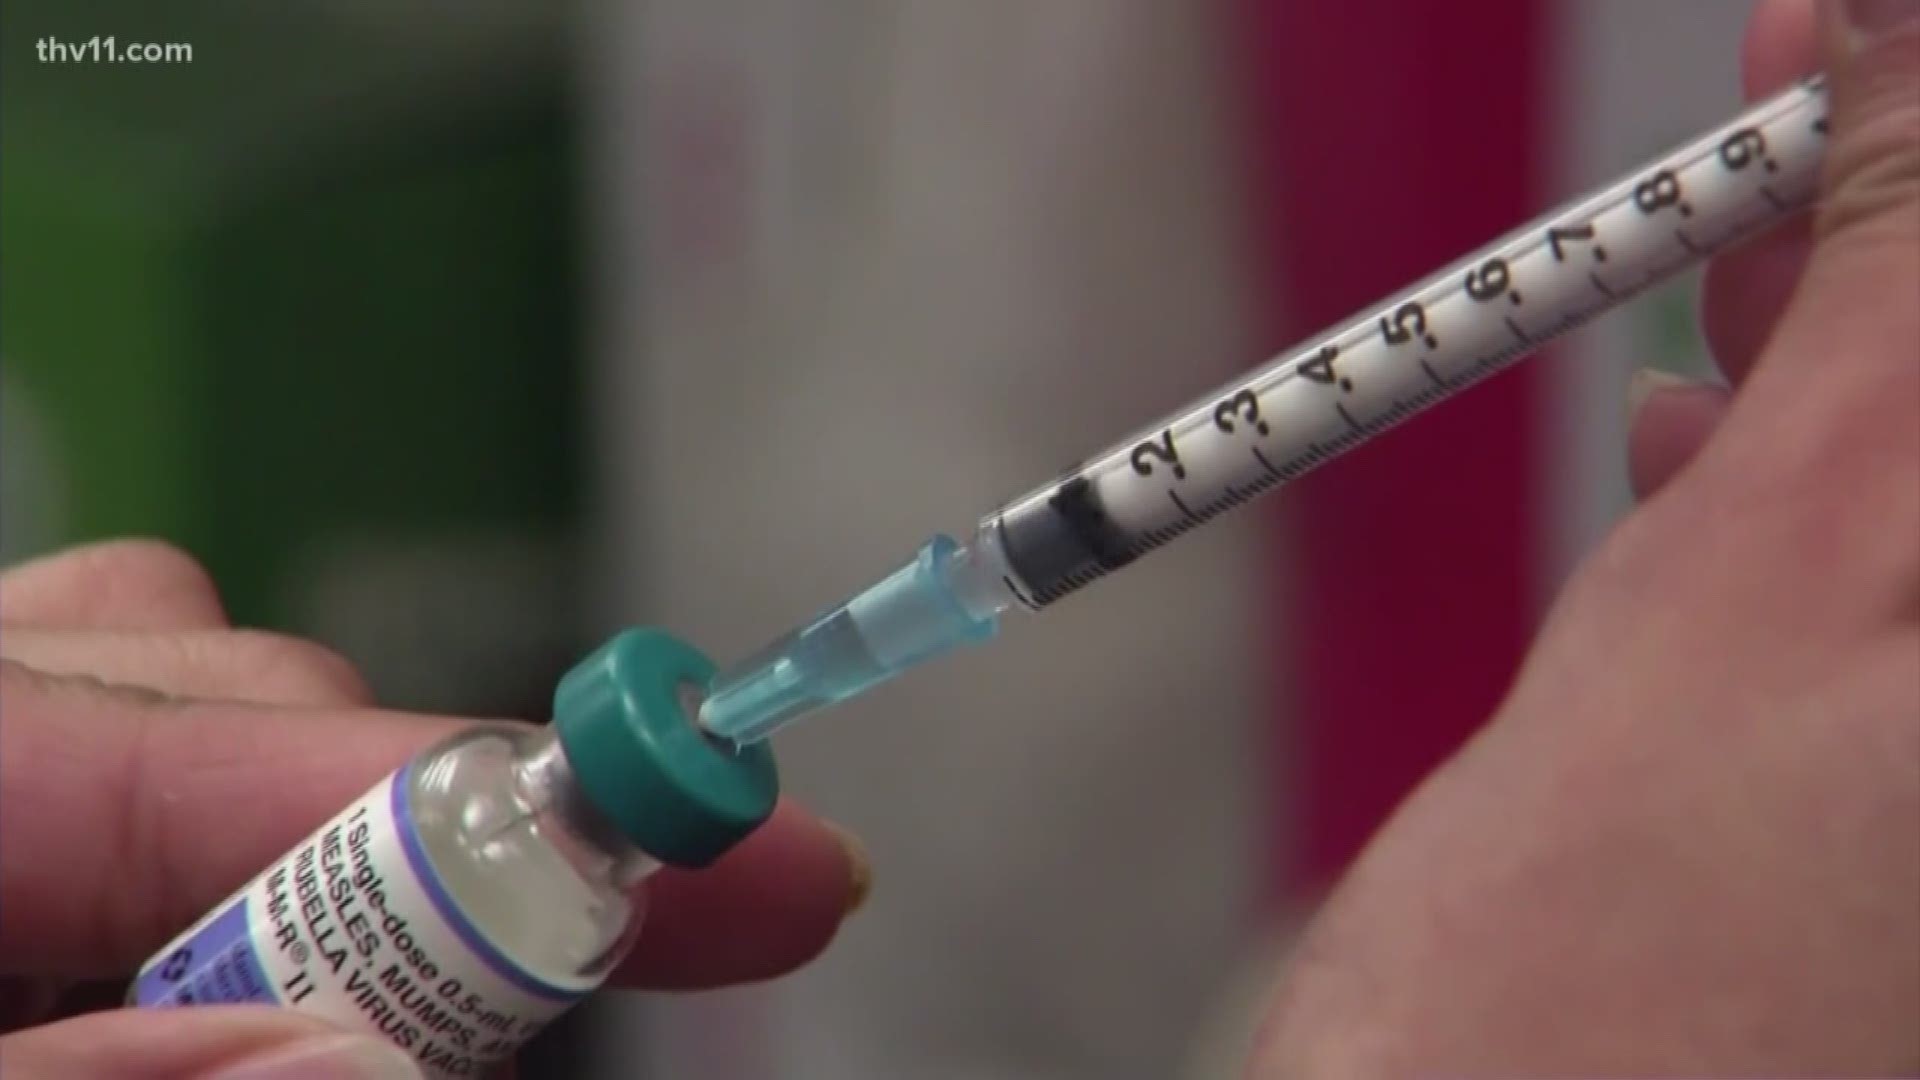 According to the latest update by the CDC, individual cases of measles have been confirmed in 26 states.